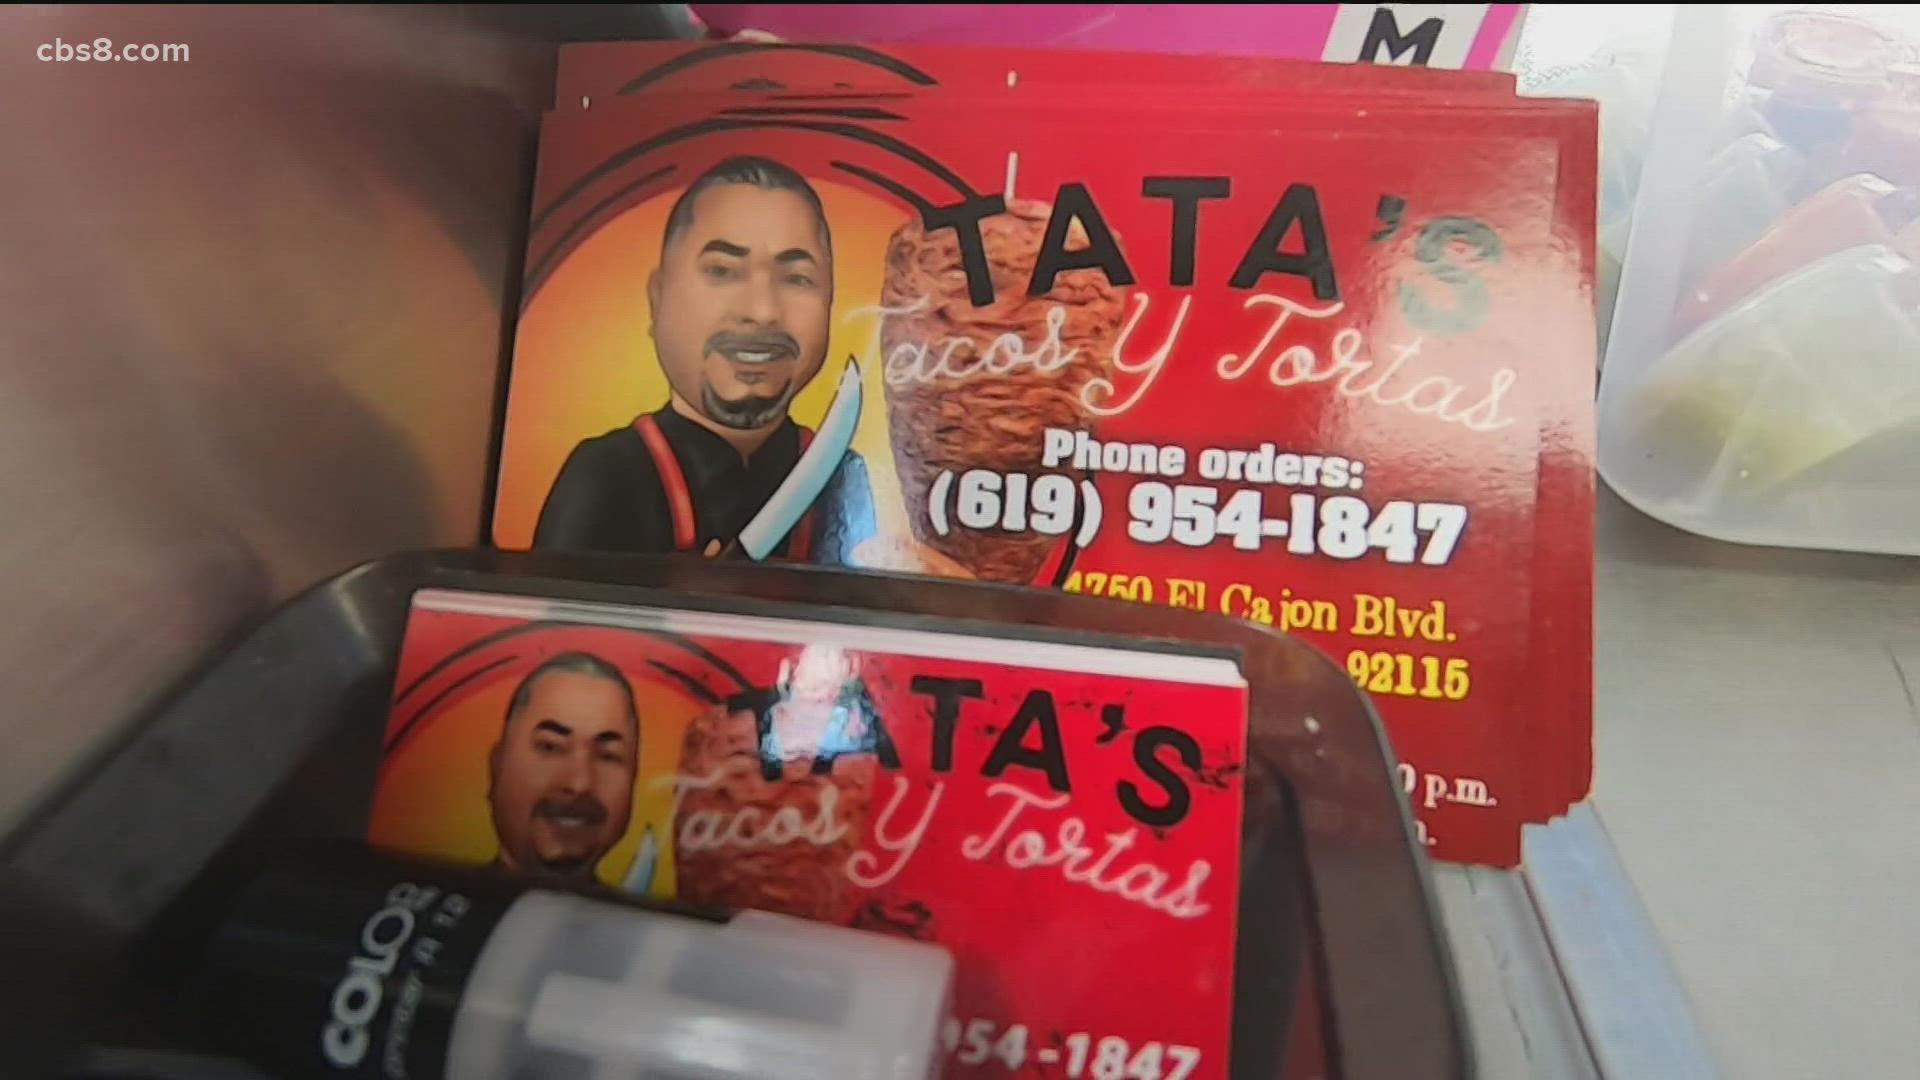 Taco truck owner has dealt with losing his father and starting a business with skyrocketing meat prices. All while still trying to provide for his family.